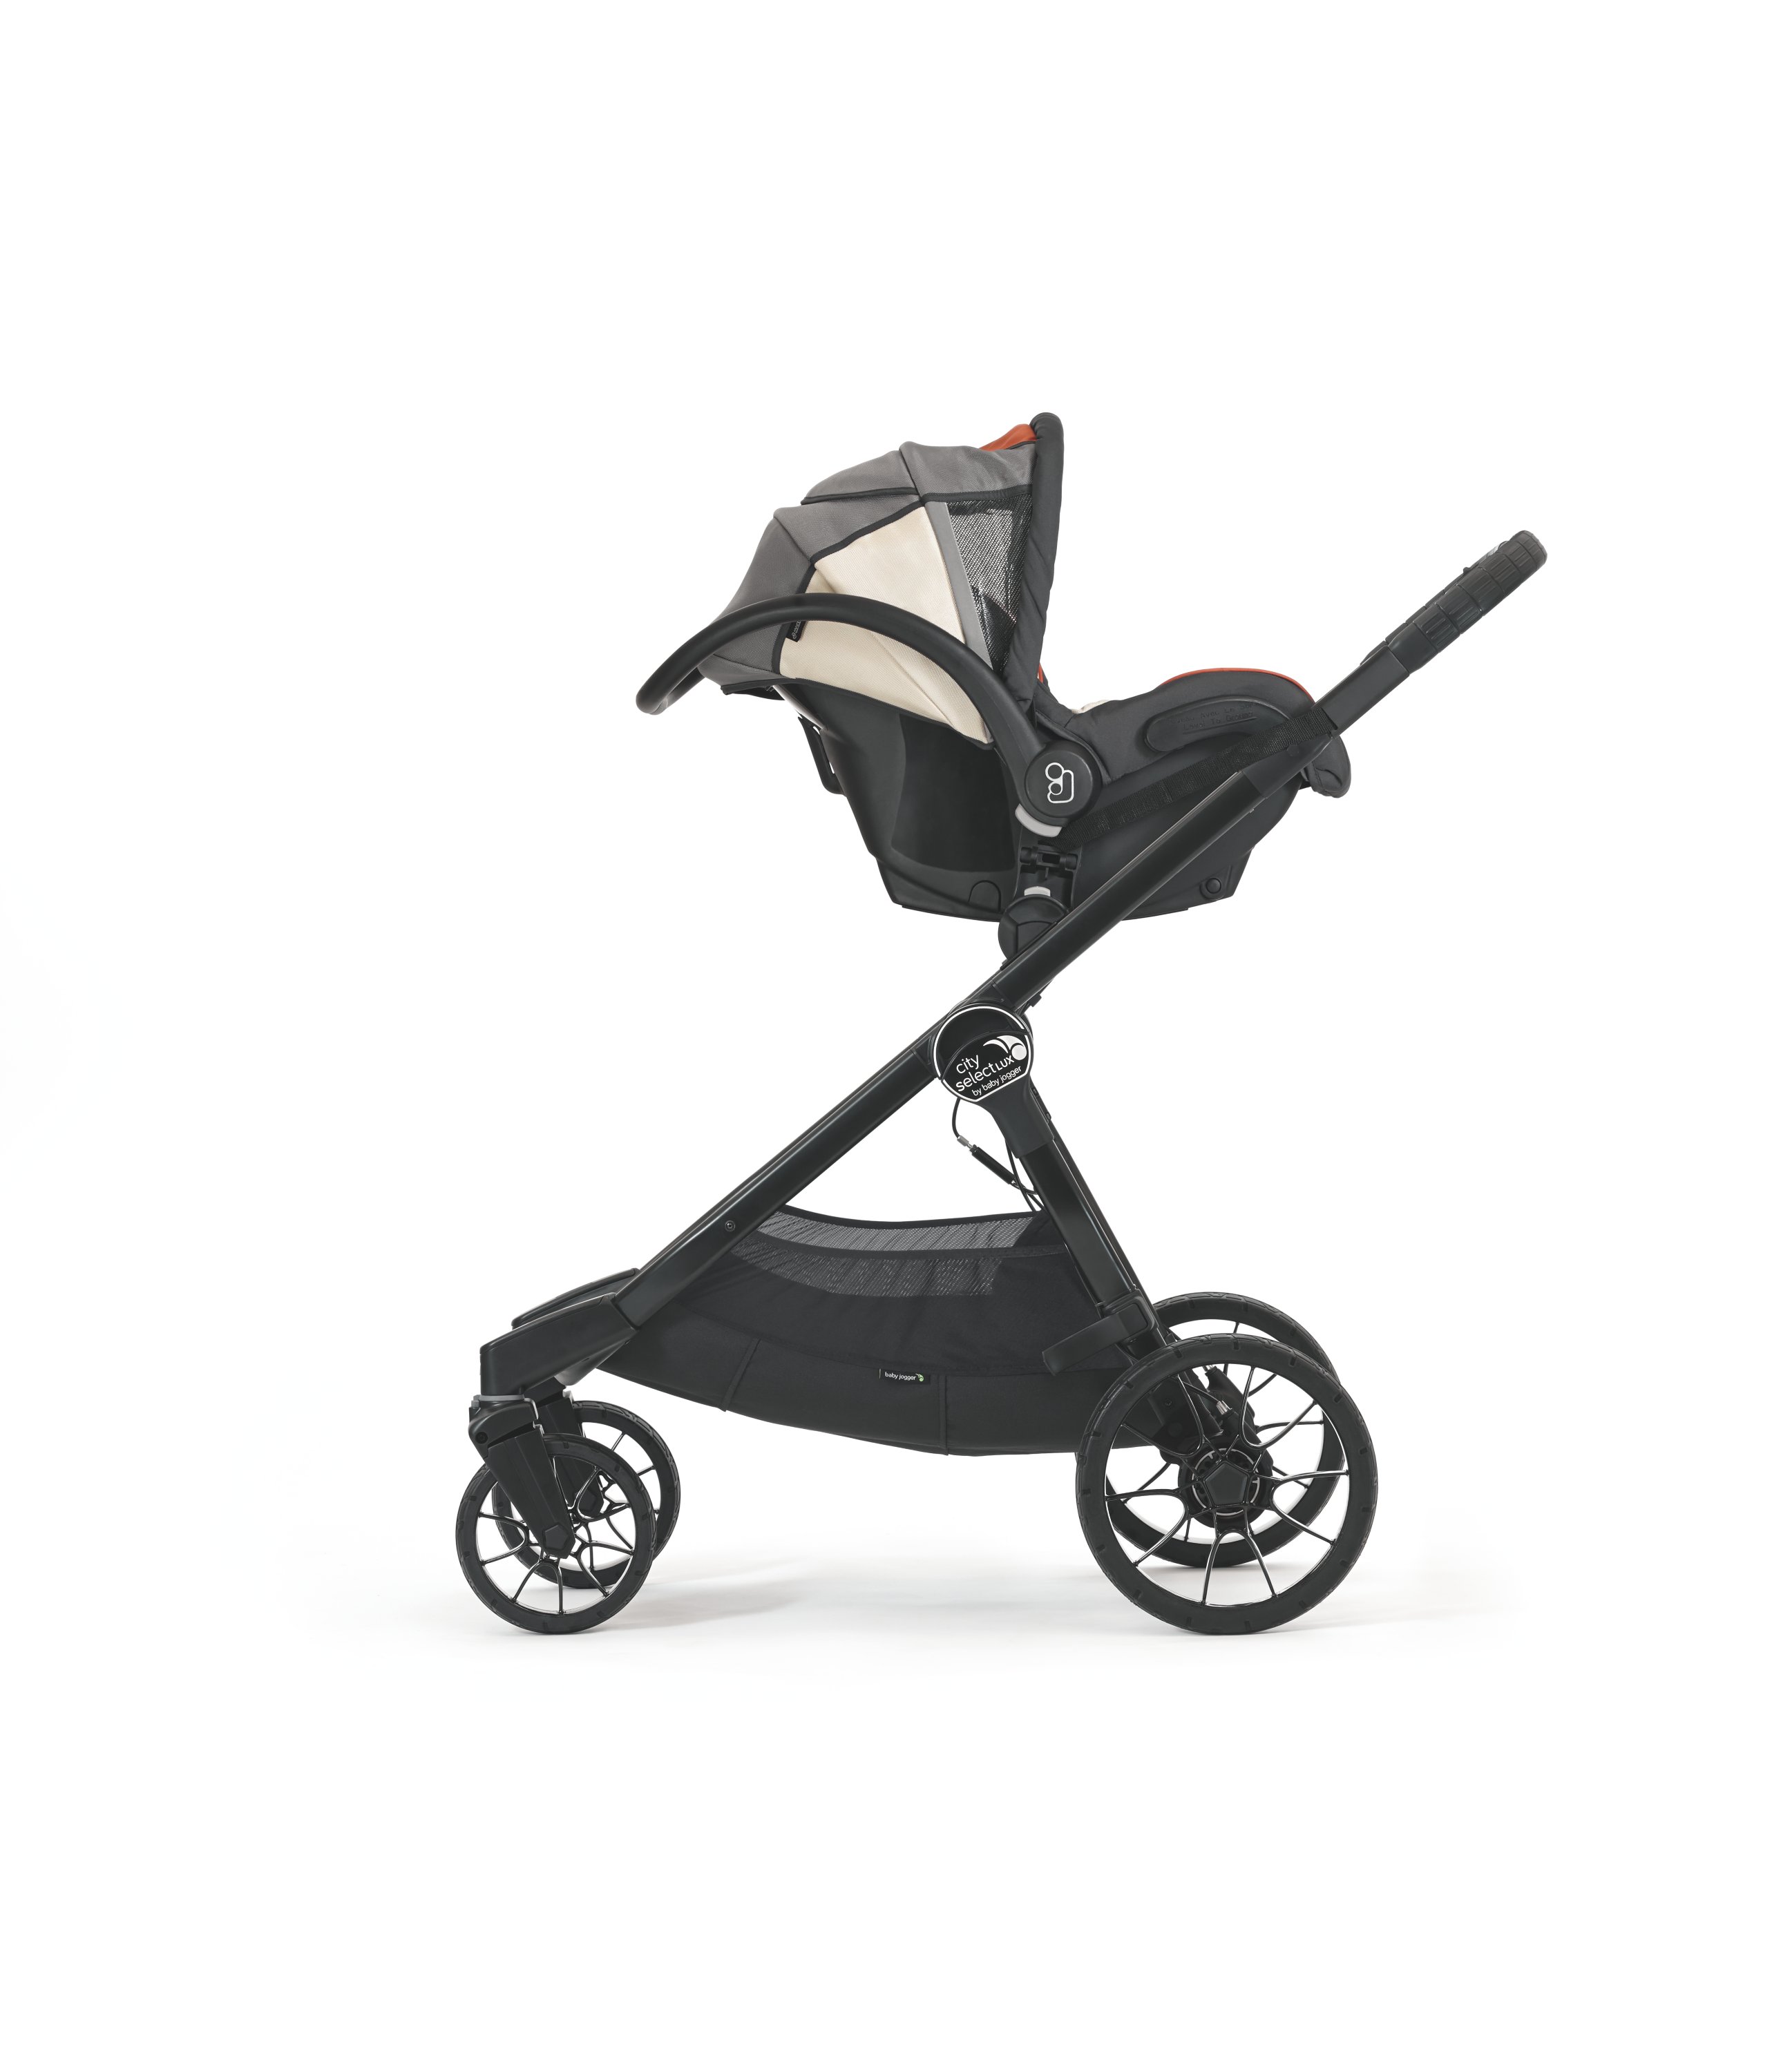 Nuna®/Maxi-Cosi®/Cybex® car seat adapters for city select® and city select®  LUX strollers